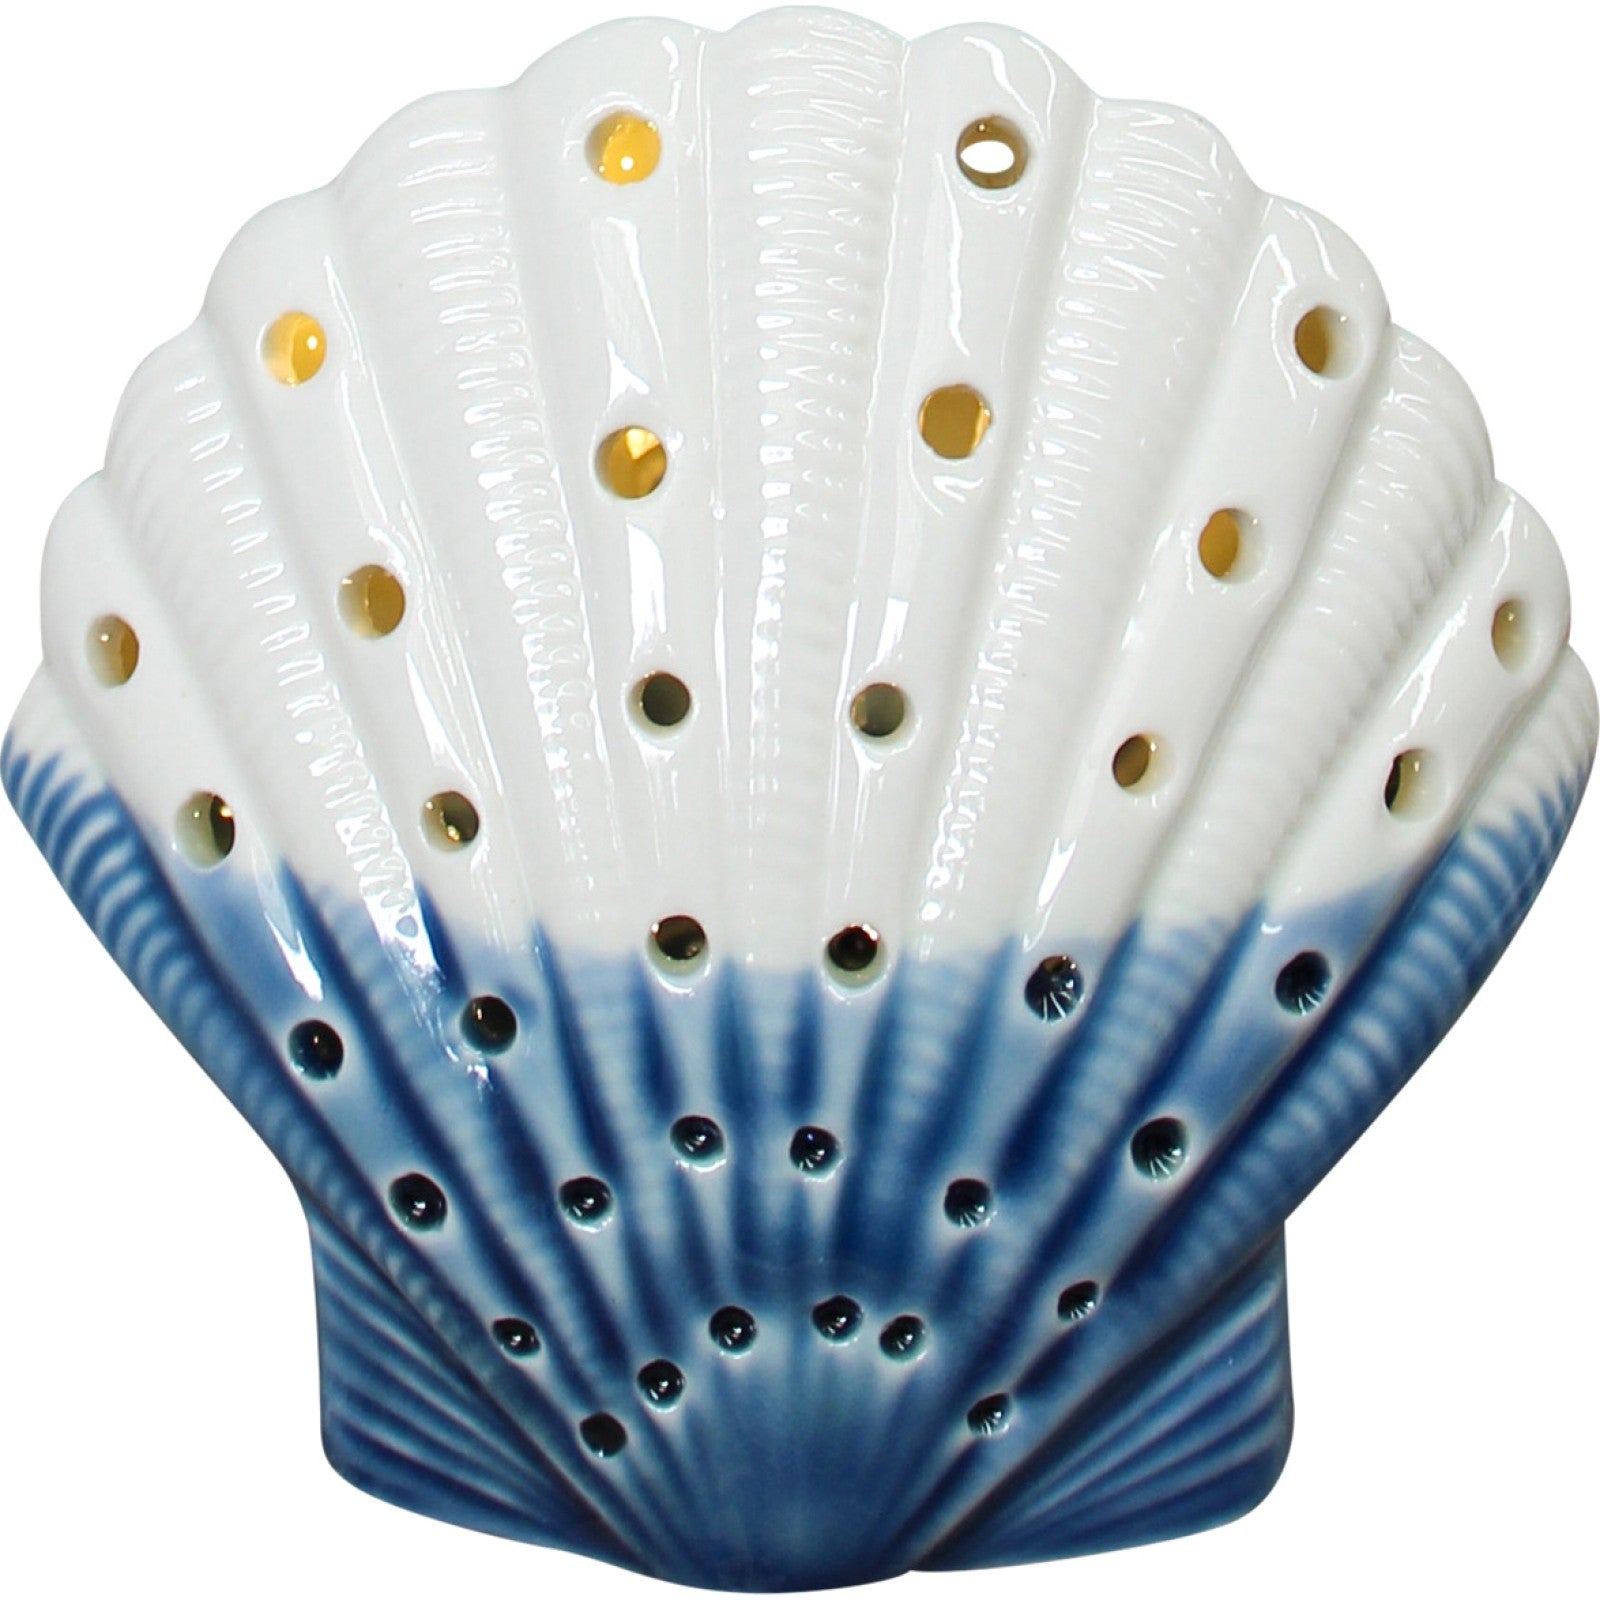 Shell Scallop Blue and White with LED Light Ceramic - The Renmy Store